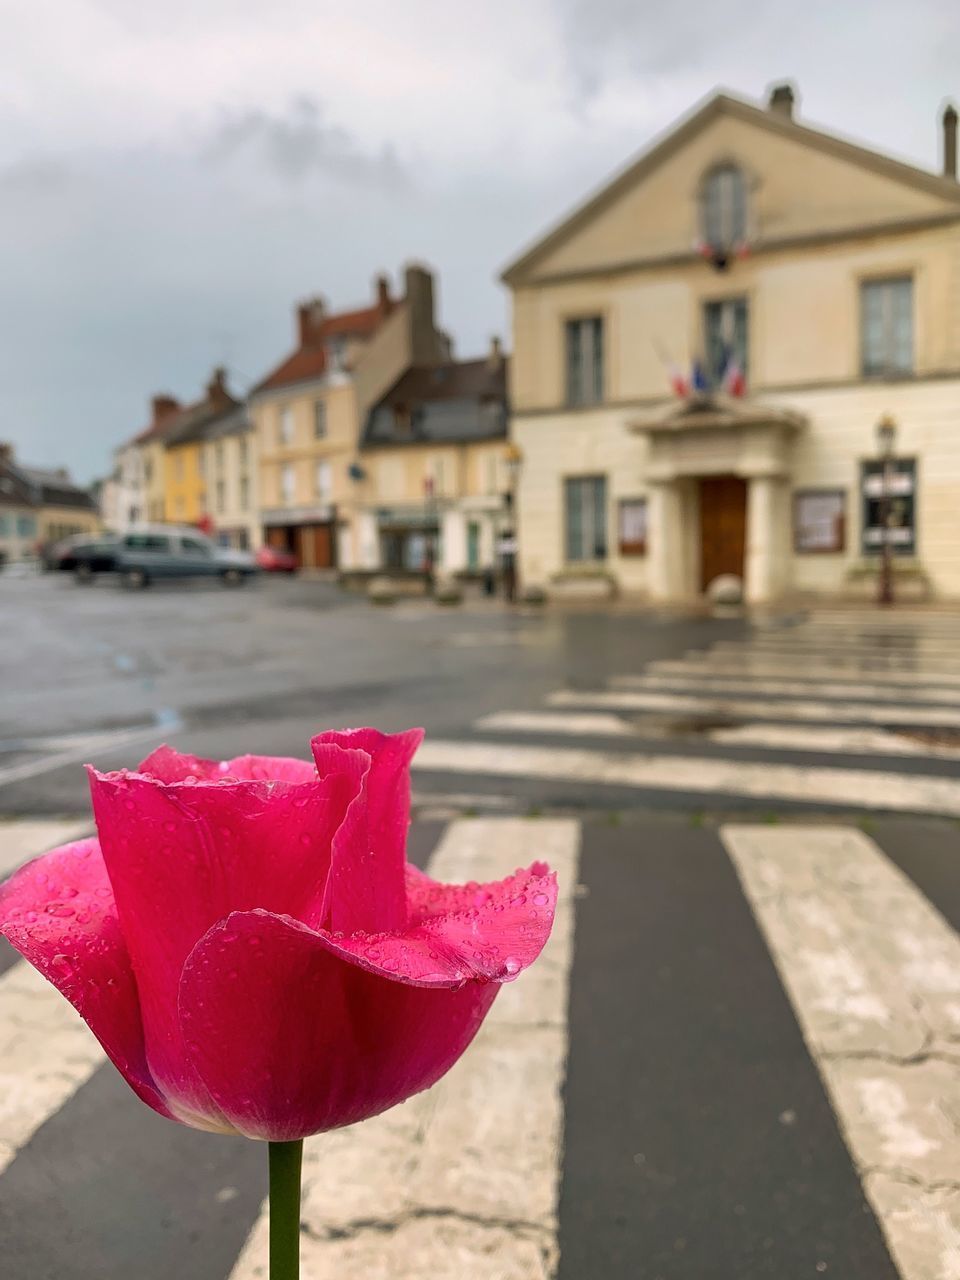 CLOSE-UP OF PINK ROSE ON STREET BY BUILDINGS